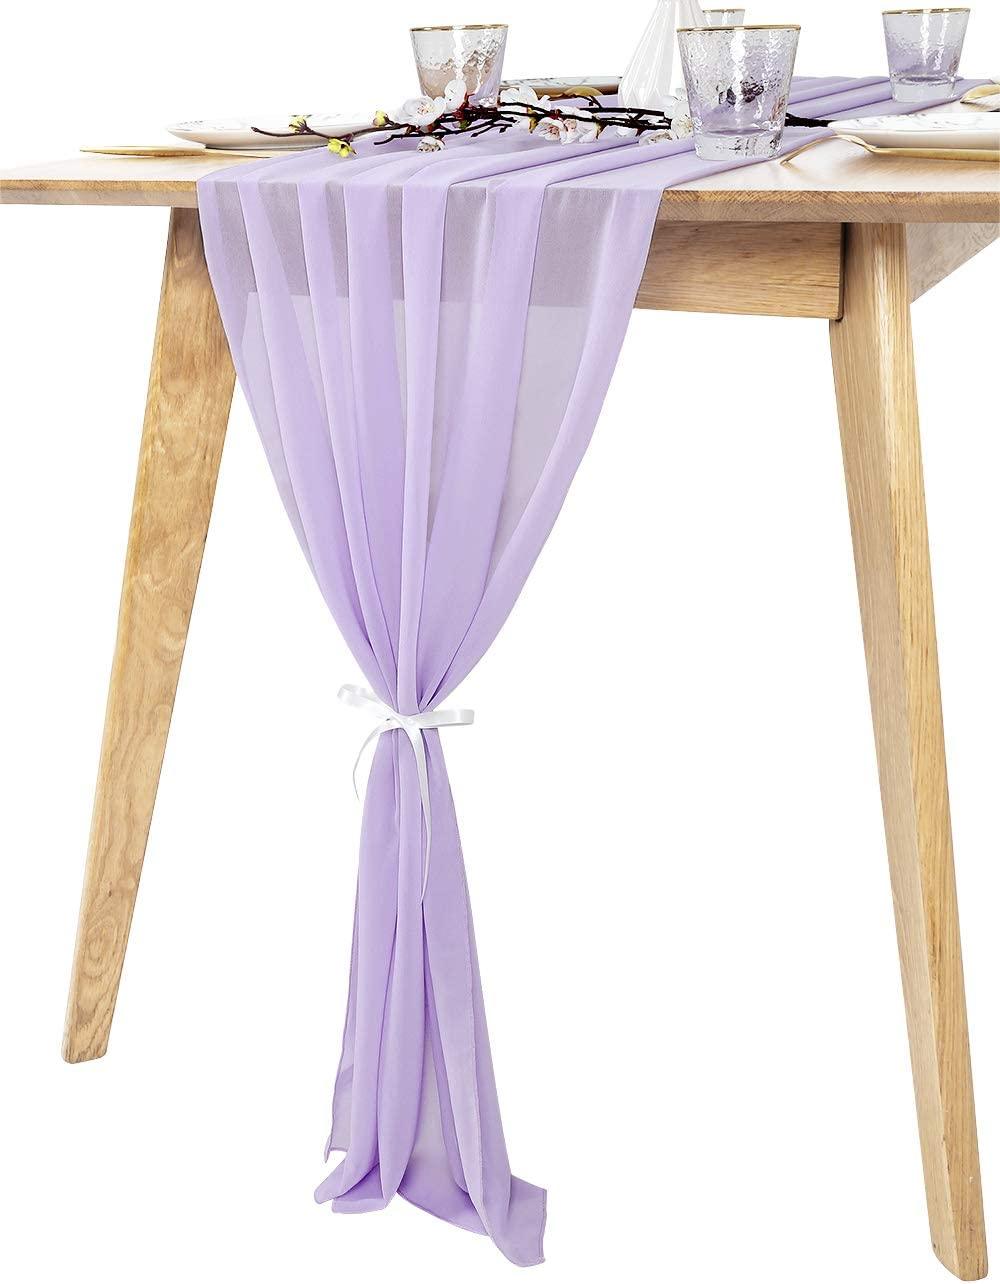 2PCS 10ft Light Purple Chiffon Table Runner Romantic Table Cover Decorations for Wedding - If you say i do